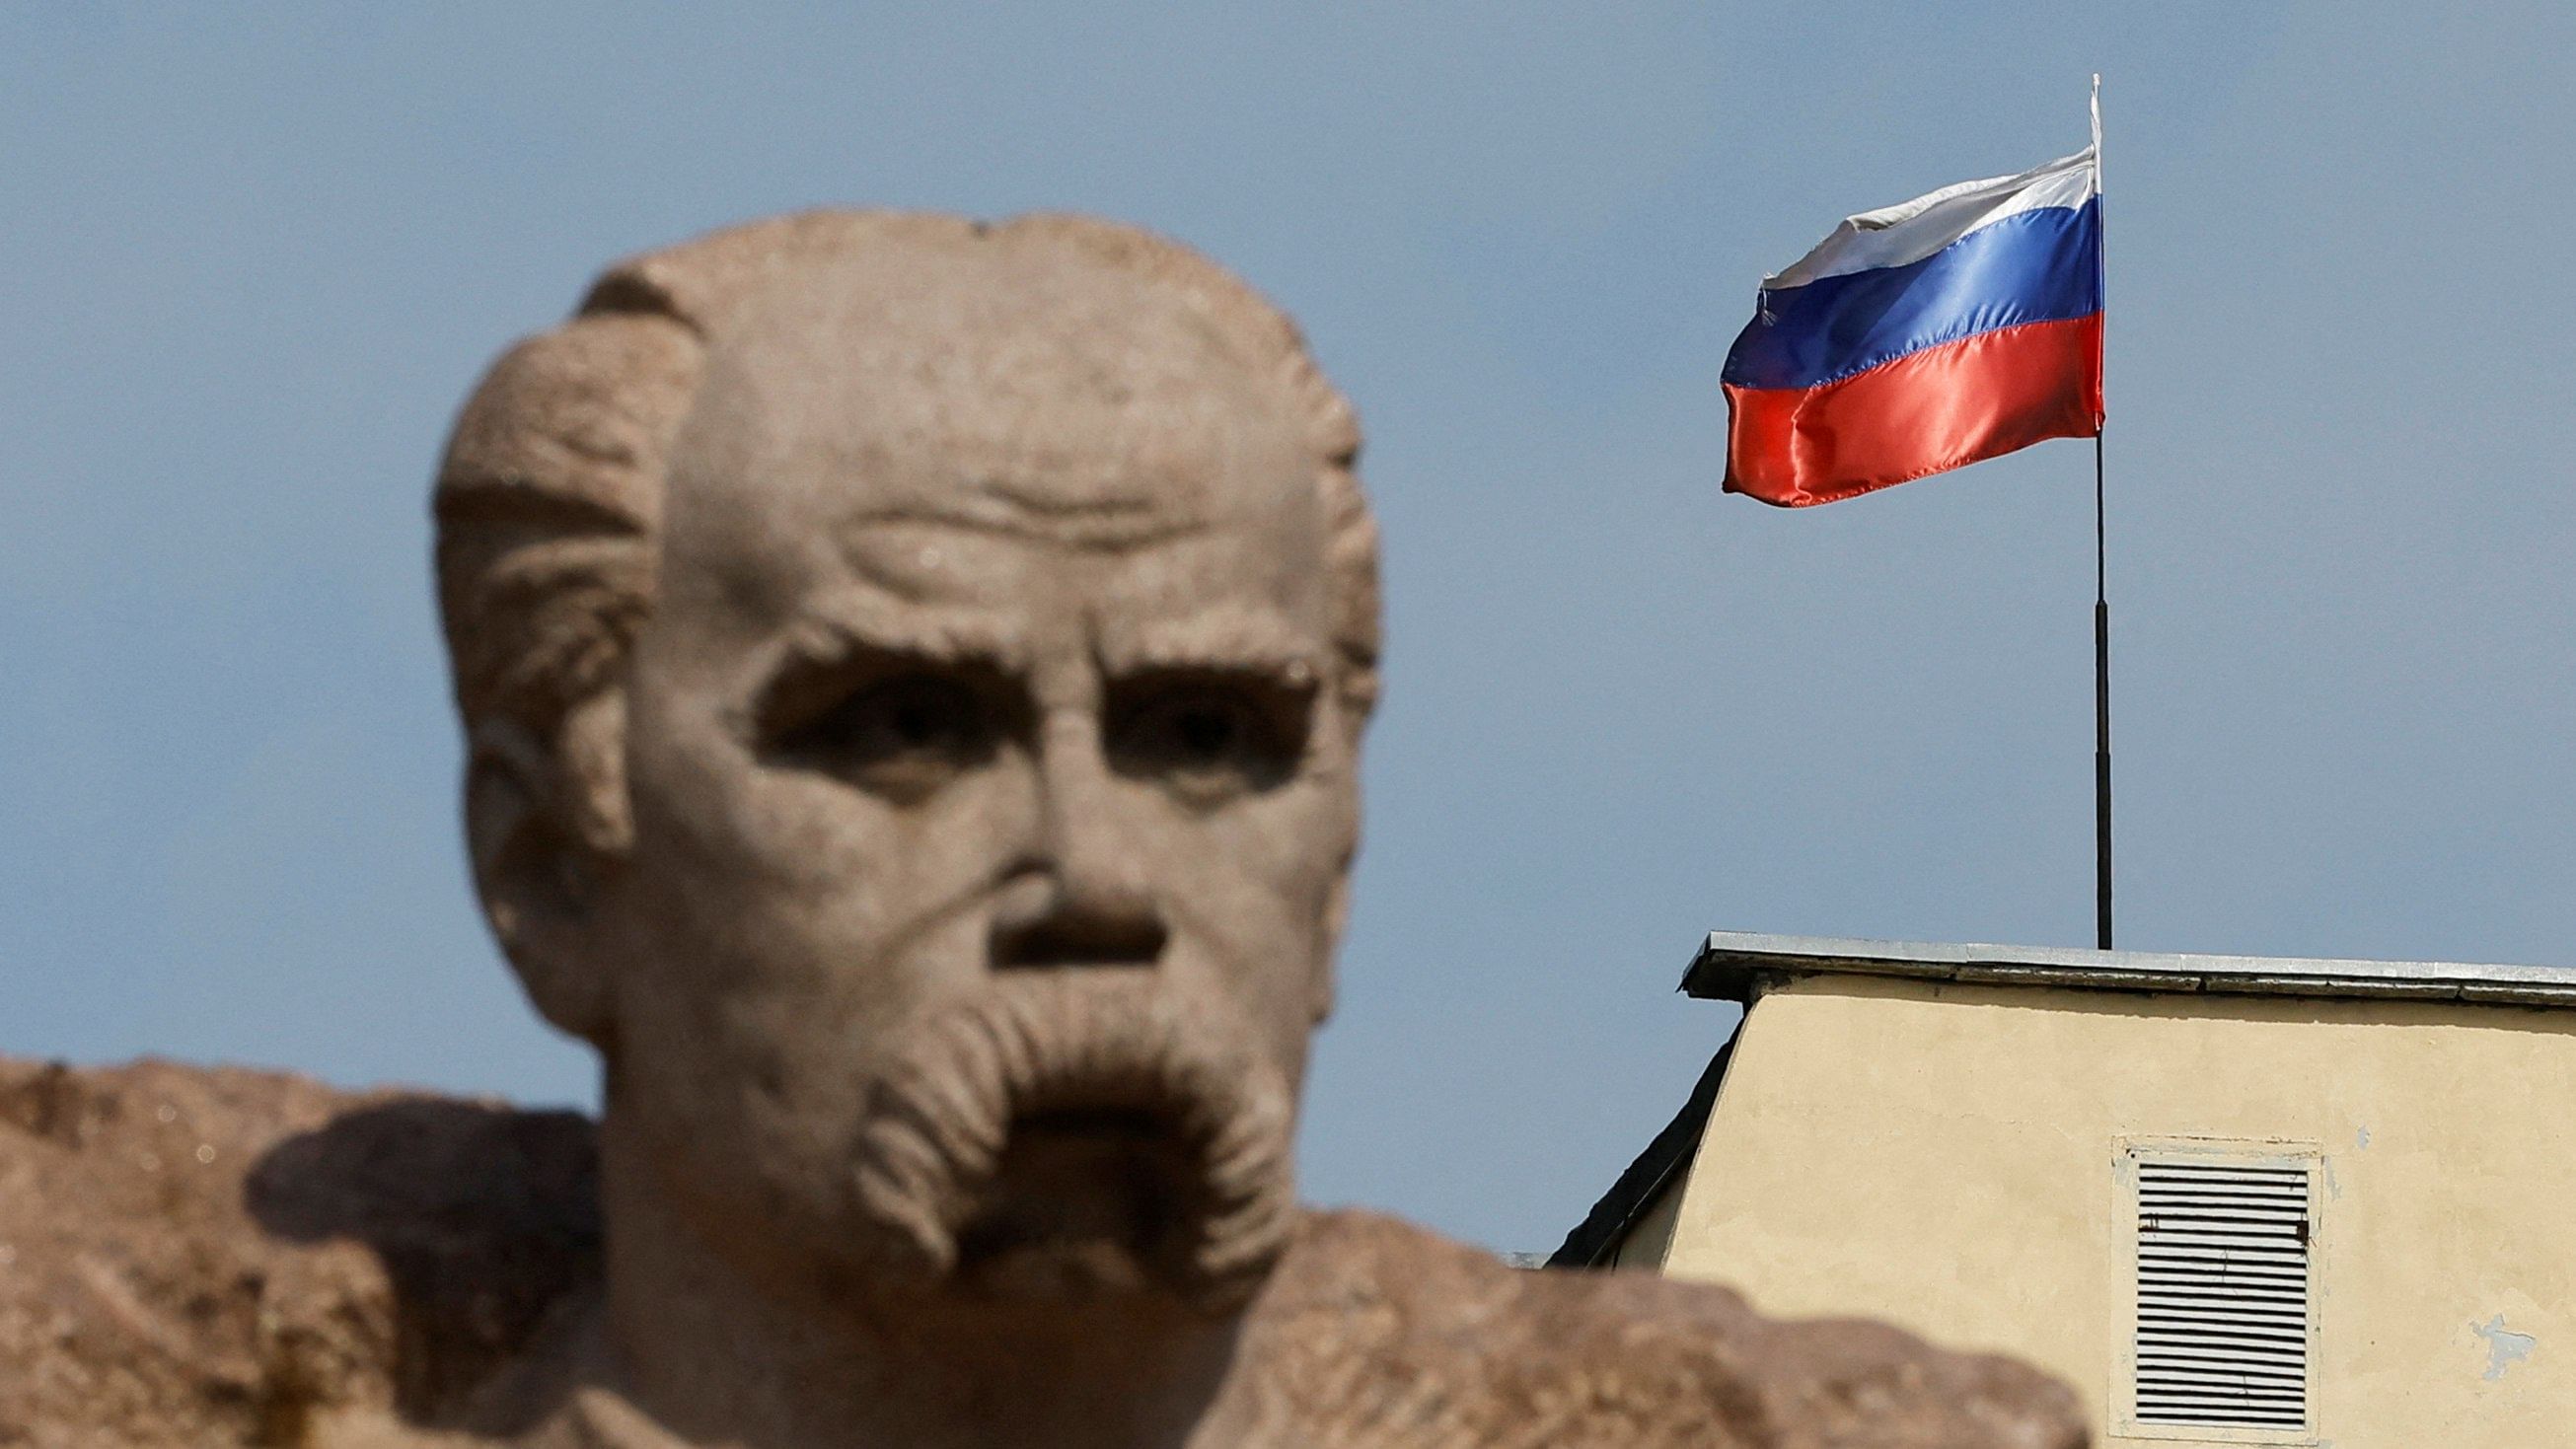 The Russian flag flies on the top of a building, as a monument to Ukrainian poet Taras Shevchenko is seen in the foreground, in the course of Ukraine-Russia conflict in the Russian-controlled city of Enerhodar in Zaporizhzhia region, Ukraine. Credit: Reuters Photo